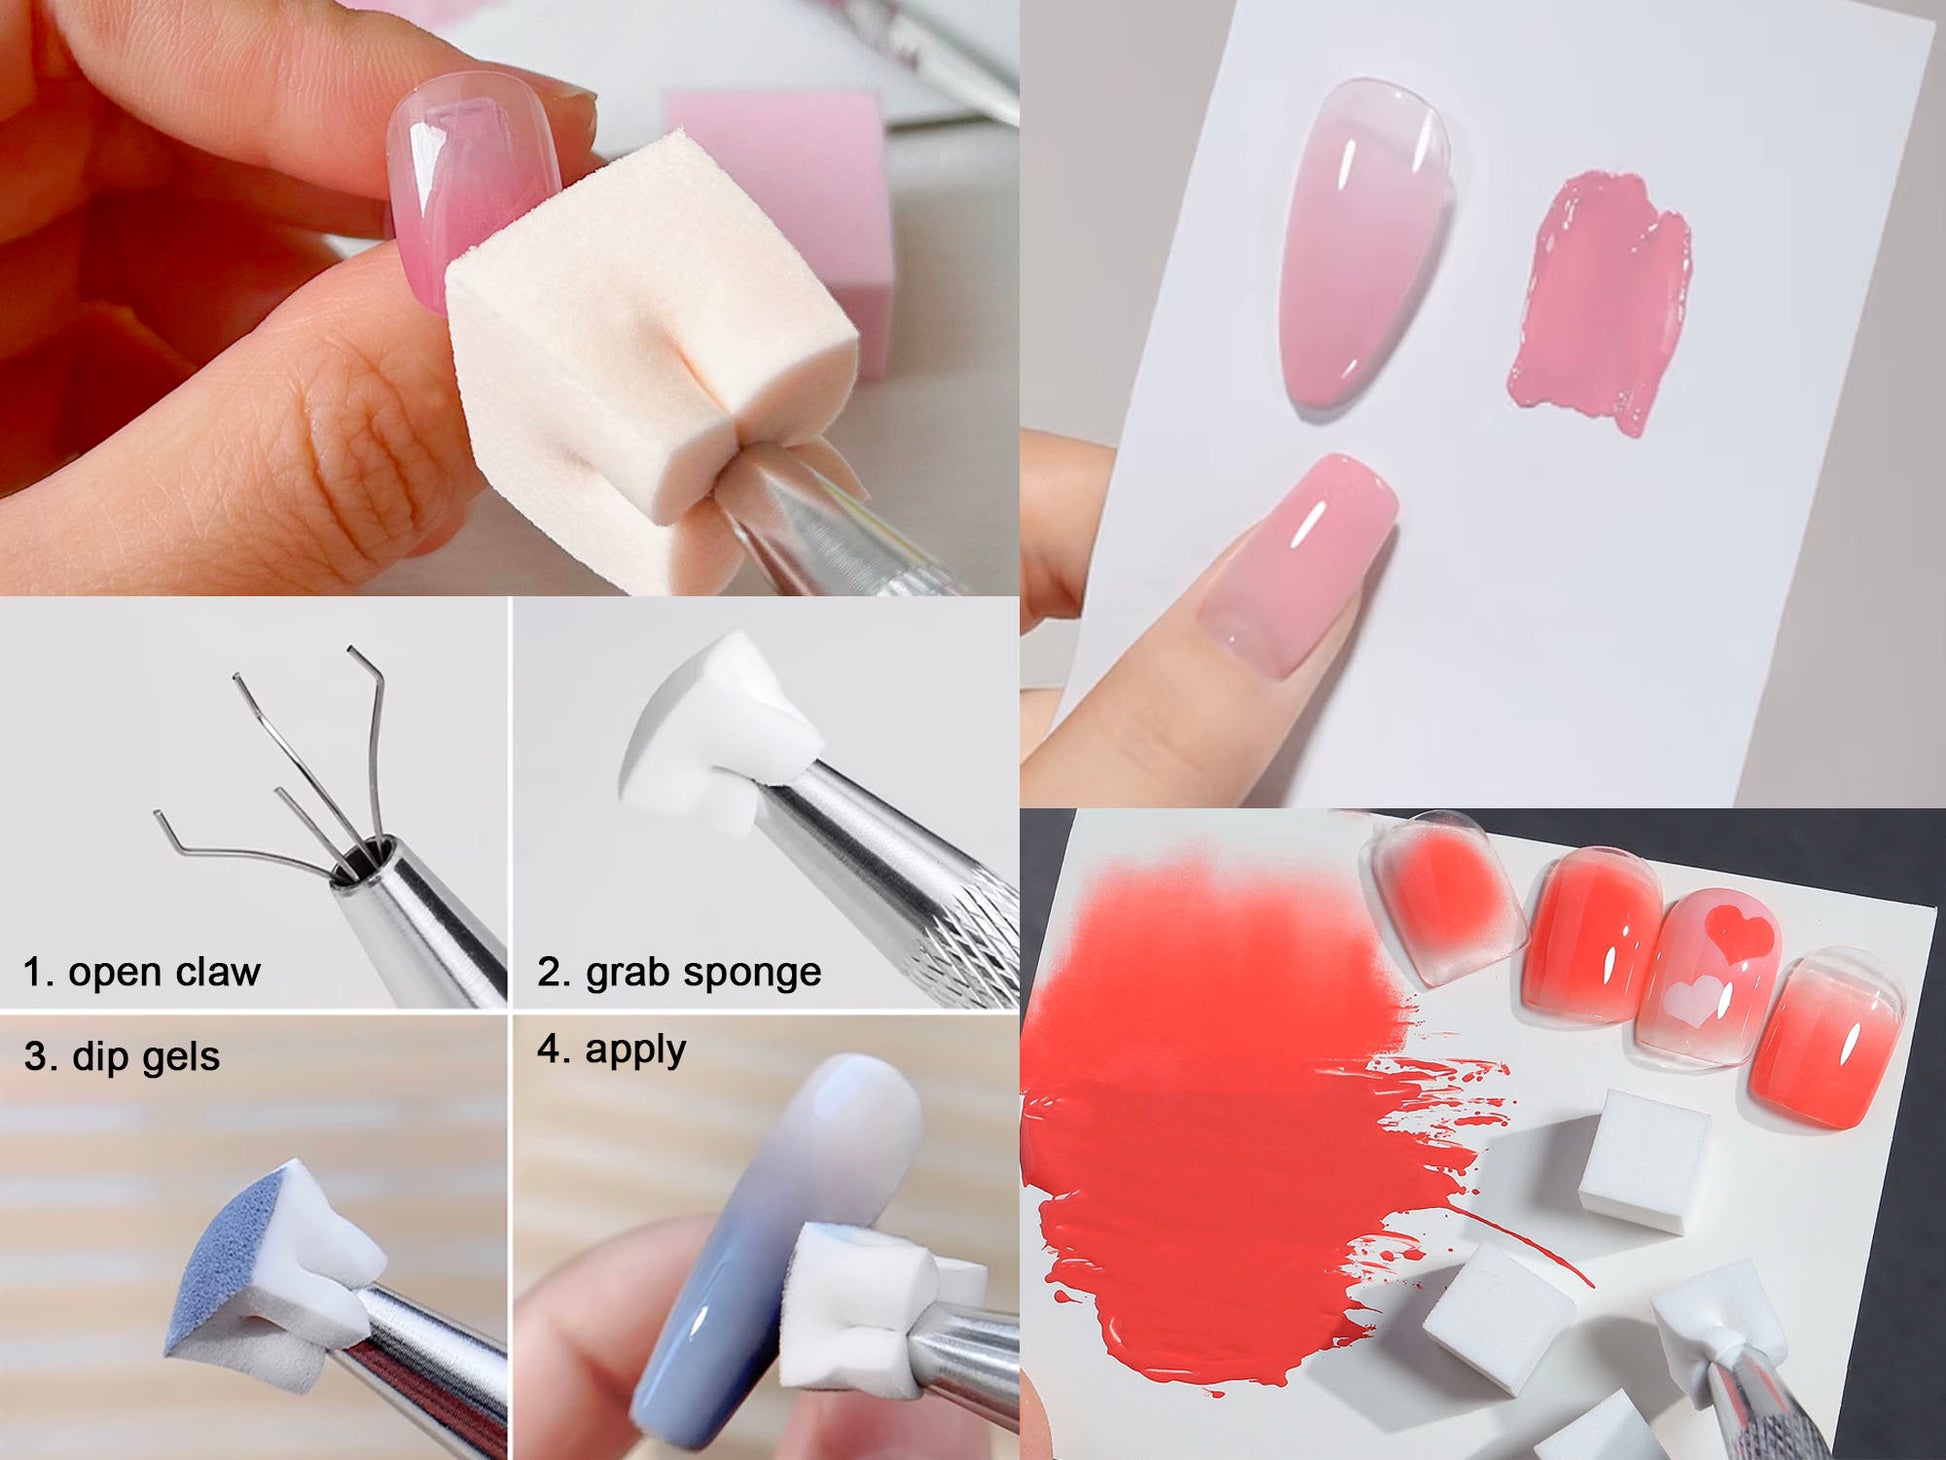 50pcs Tofu Puffs Sponges and Picker for Ombre Gradient Nail Art/ Color Ombré Shade Latex Free Sponge Blocks & Tongs Trendy Nails Tool